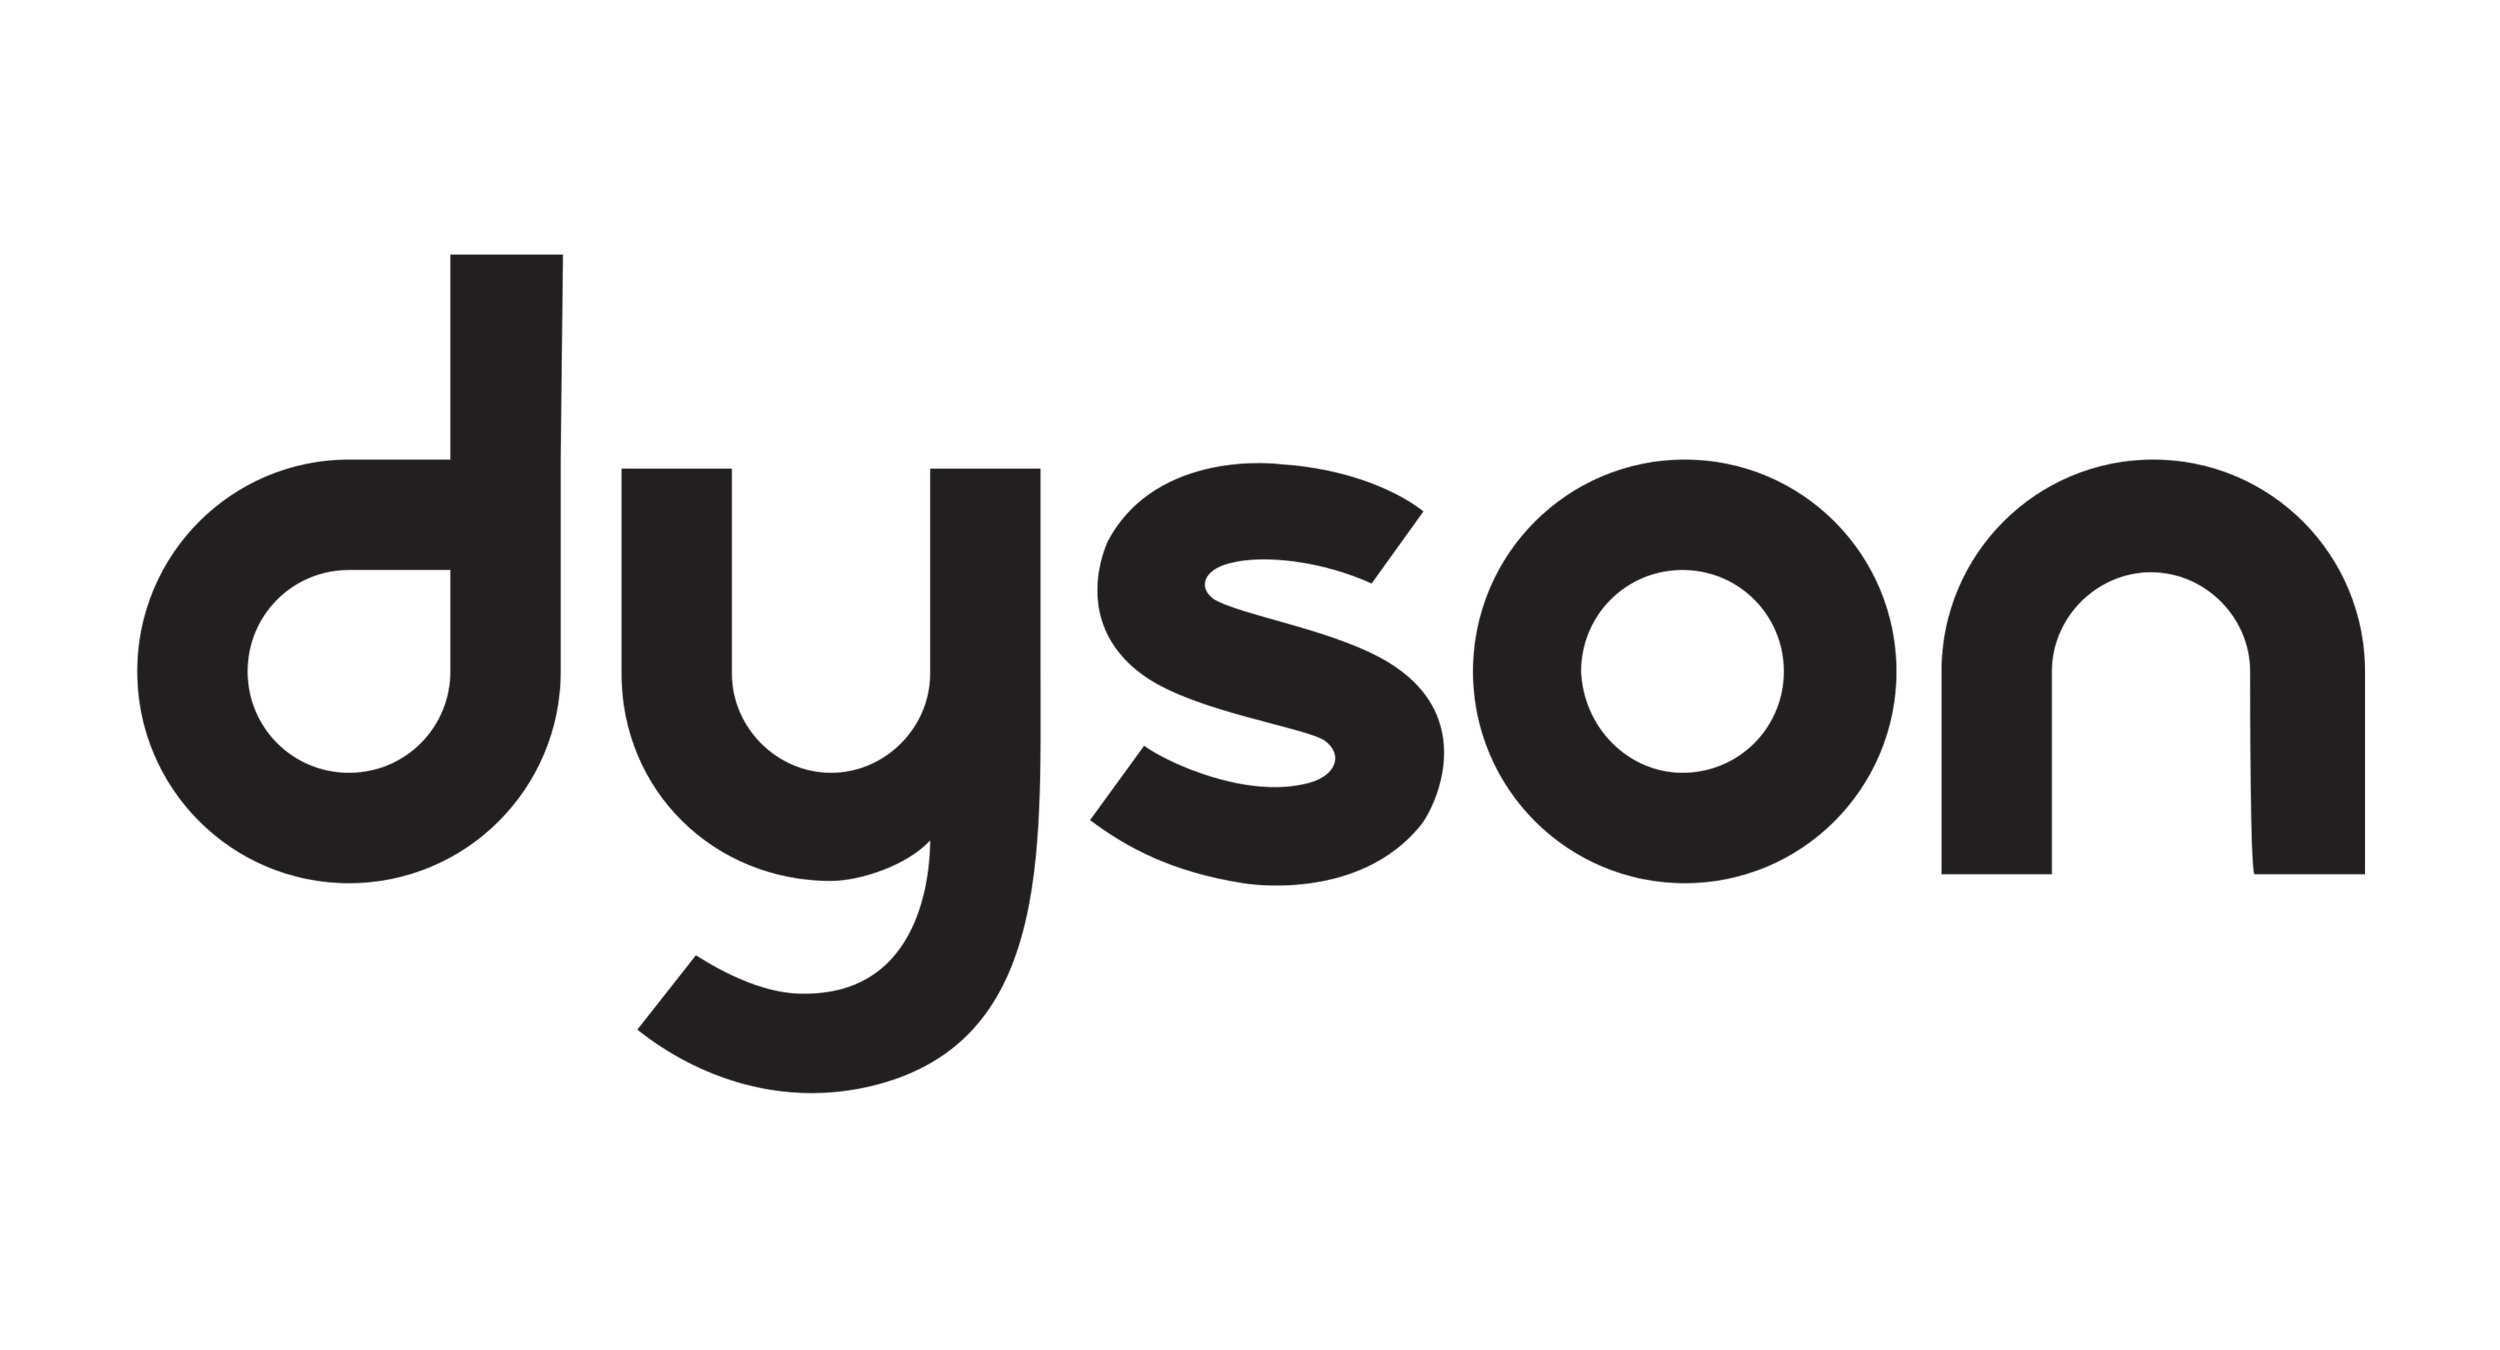 WaypointTrustedBy-Logo-1.png